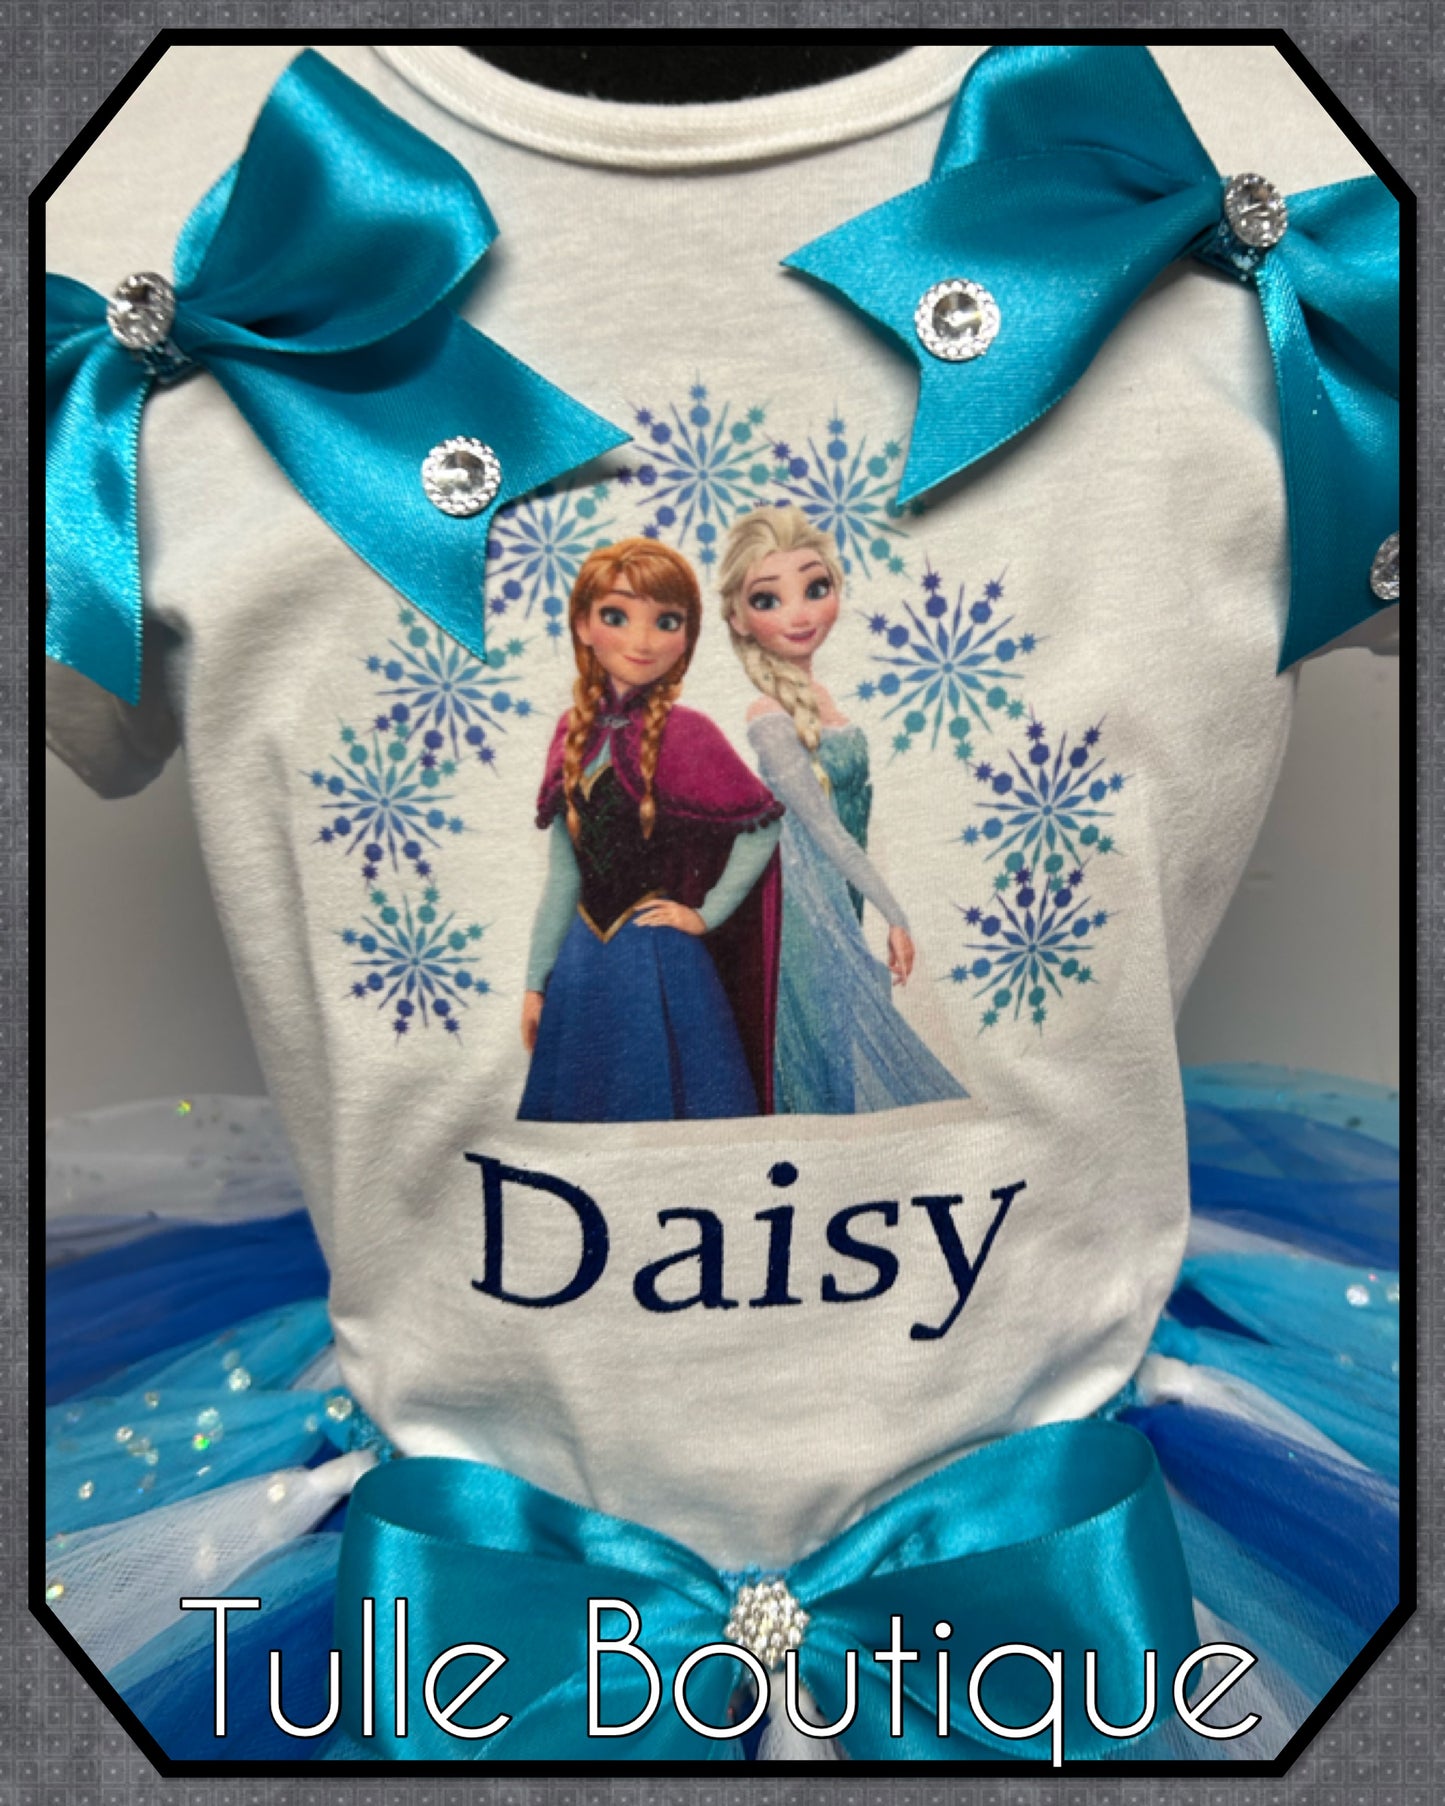 Frozen T-shirt and tutu birthday party outfit